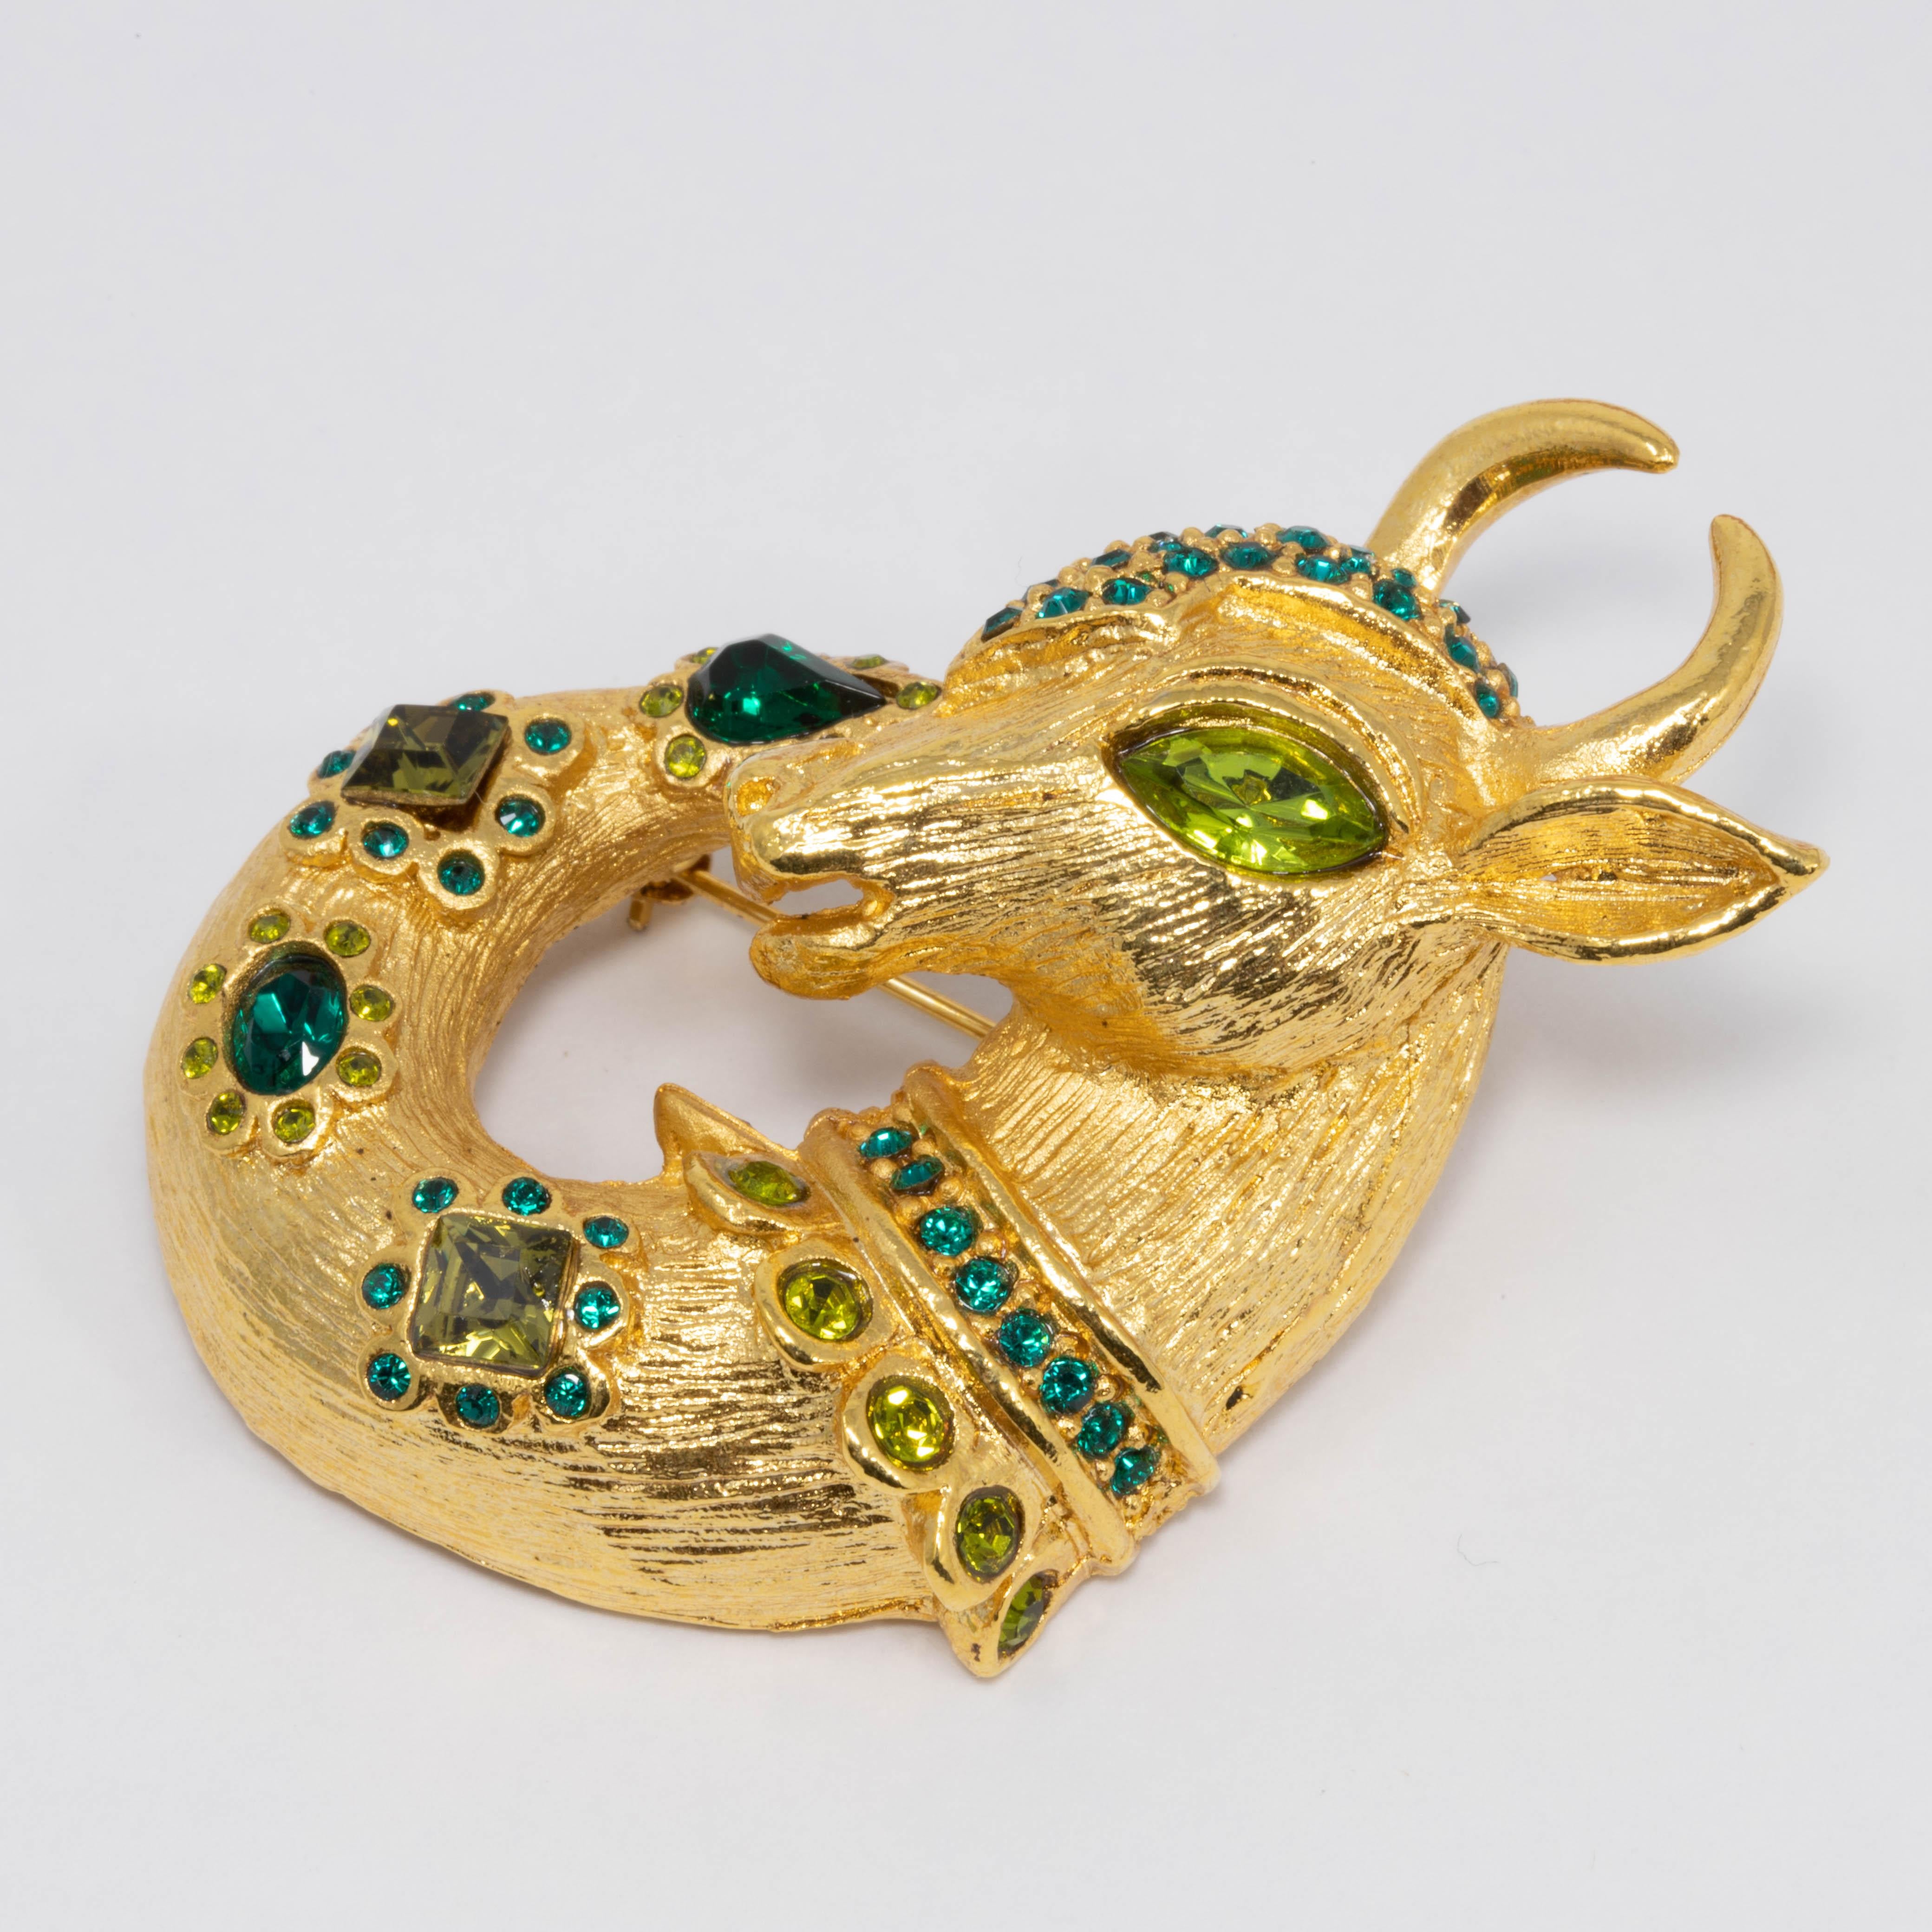 A golden mythological horned animal pin to add some magical allure to your style! Can be worn as a pin brooch or a necklace pendant. 

By Oscar de la Renta. Gold plated mythological deer / goat / ram motif. Green peridot and emerald colored